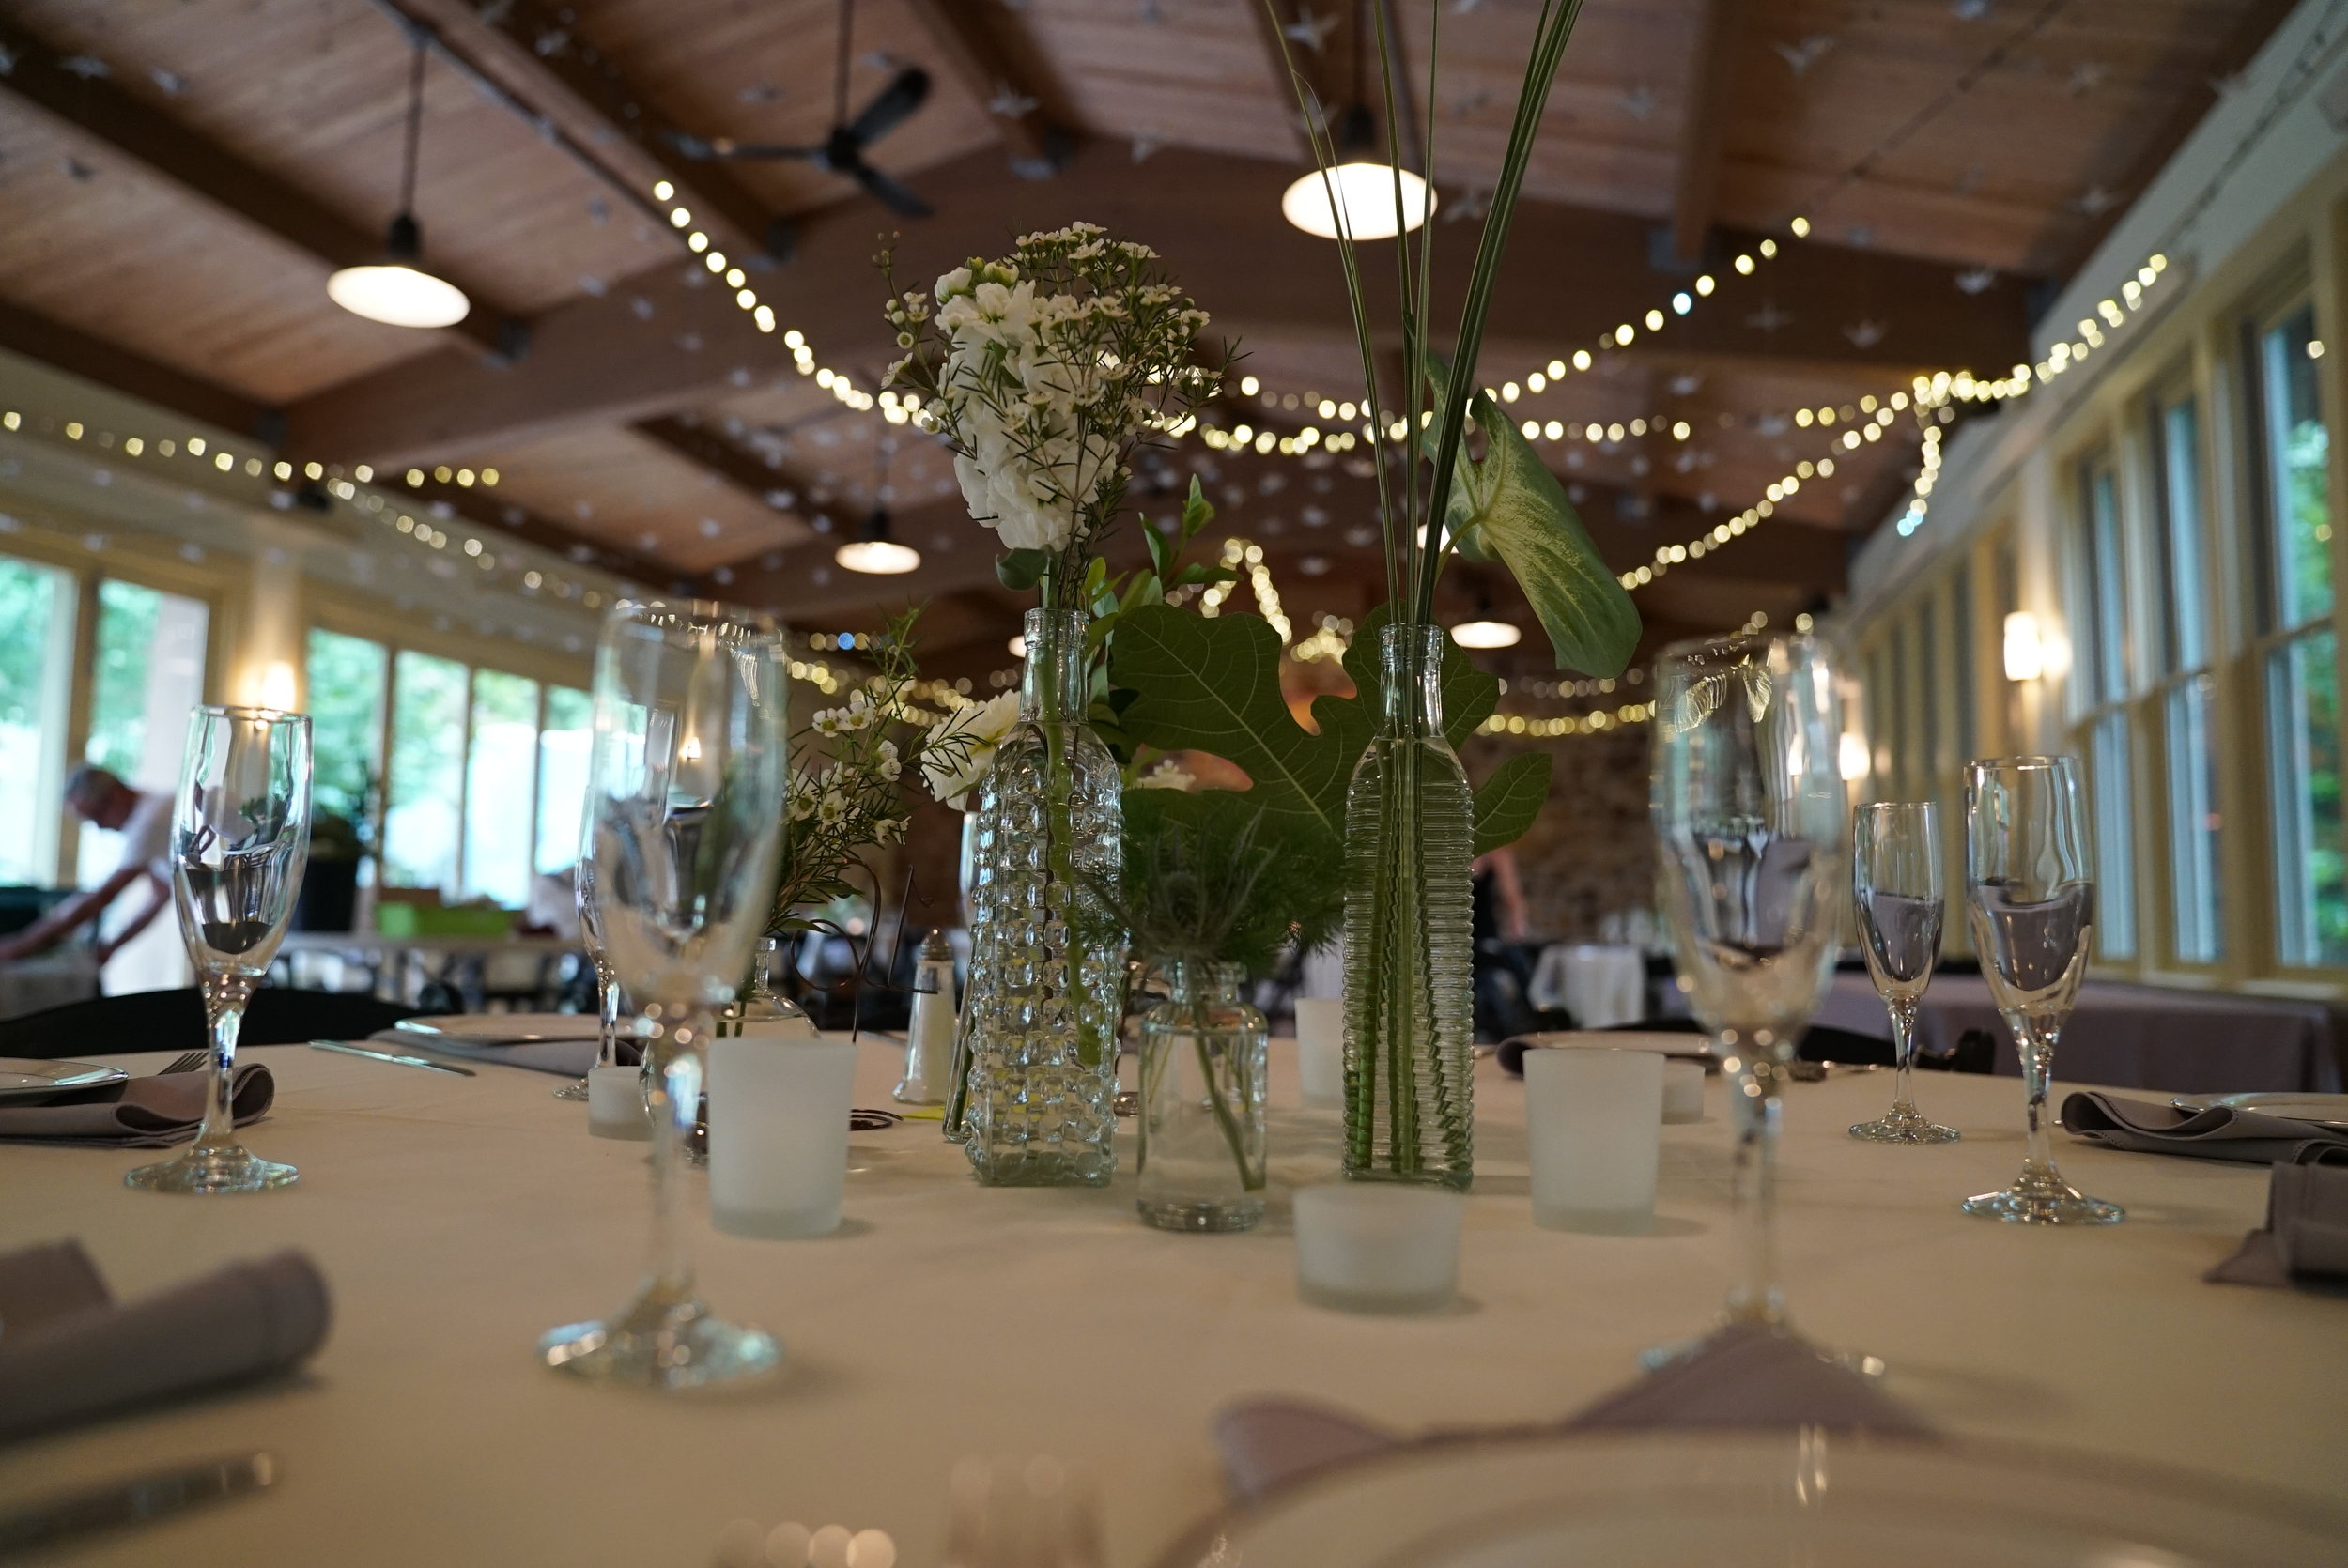  I used upwards of 8 different bottle shapes to create a eclectic yet cohesive centerpiece. We wanted people to be able to see each other over the flowers, as all the tables were round.&nbsp; 